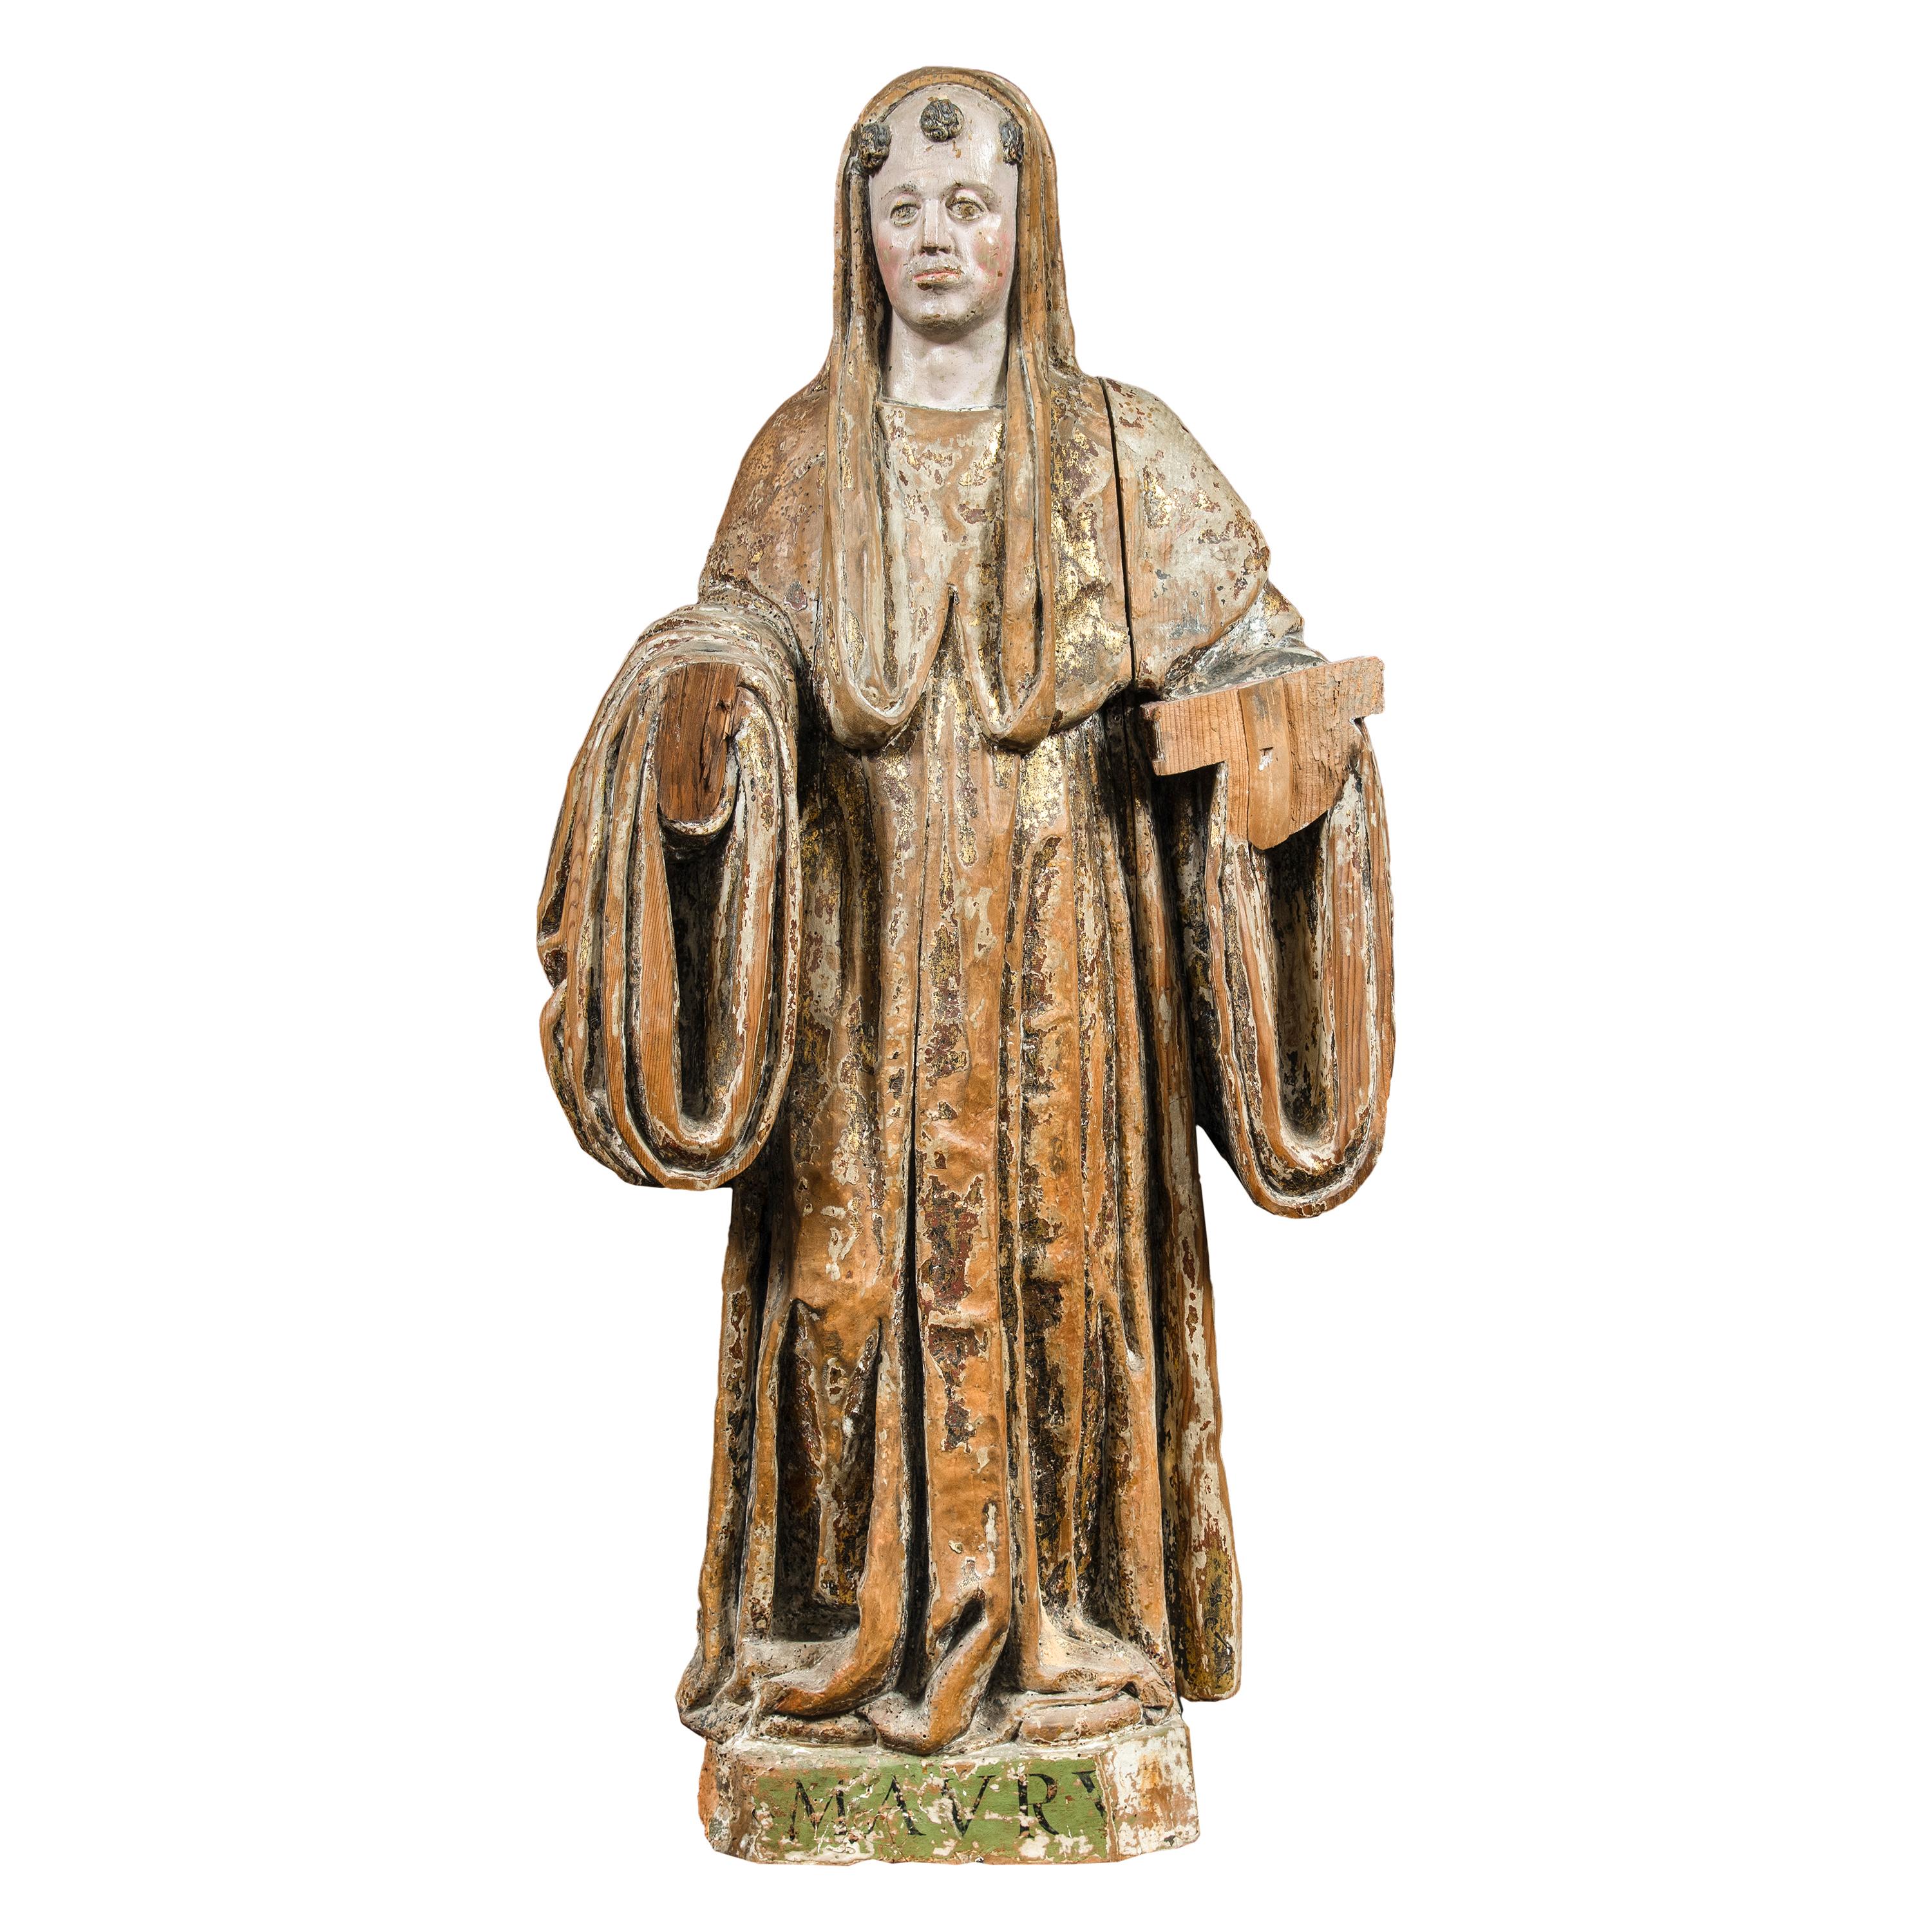 Unknown Figurative Sculpture - 16th century Italian carved wood sculpture - Saint Mauritius - Gilded Painted re